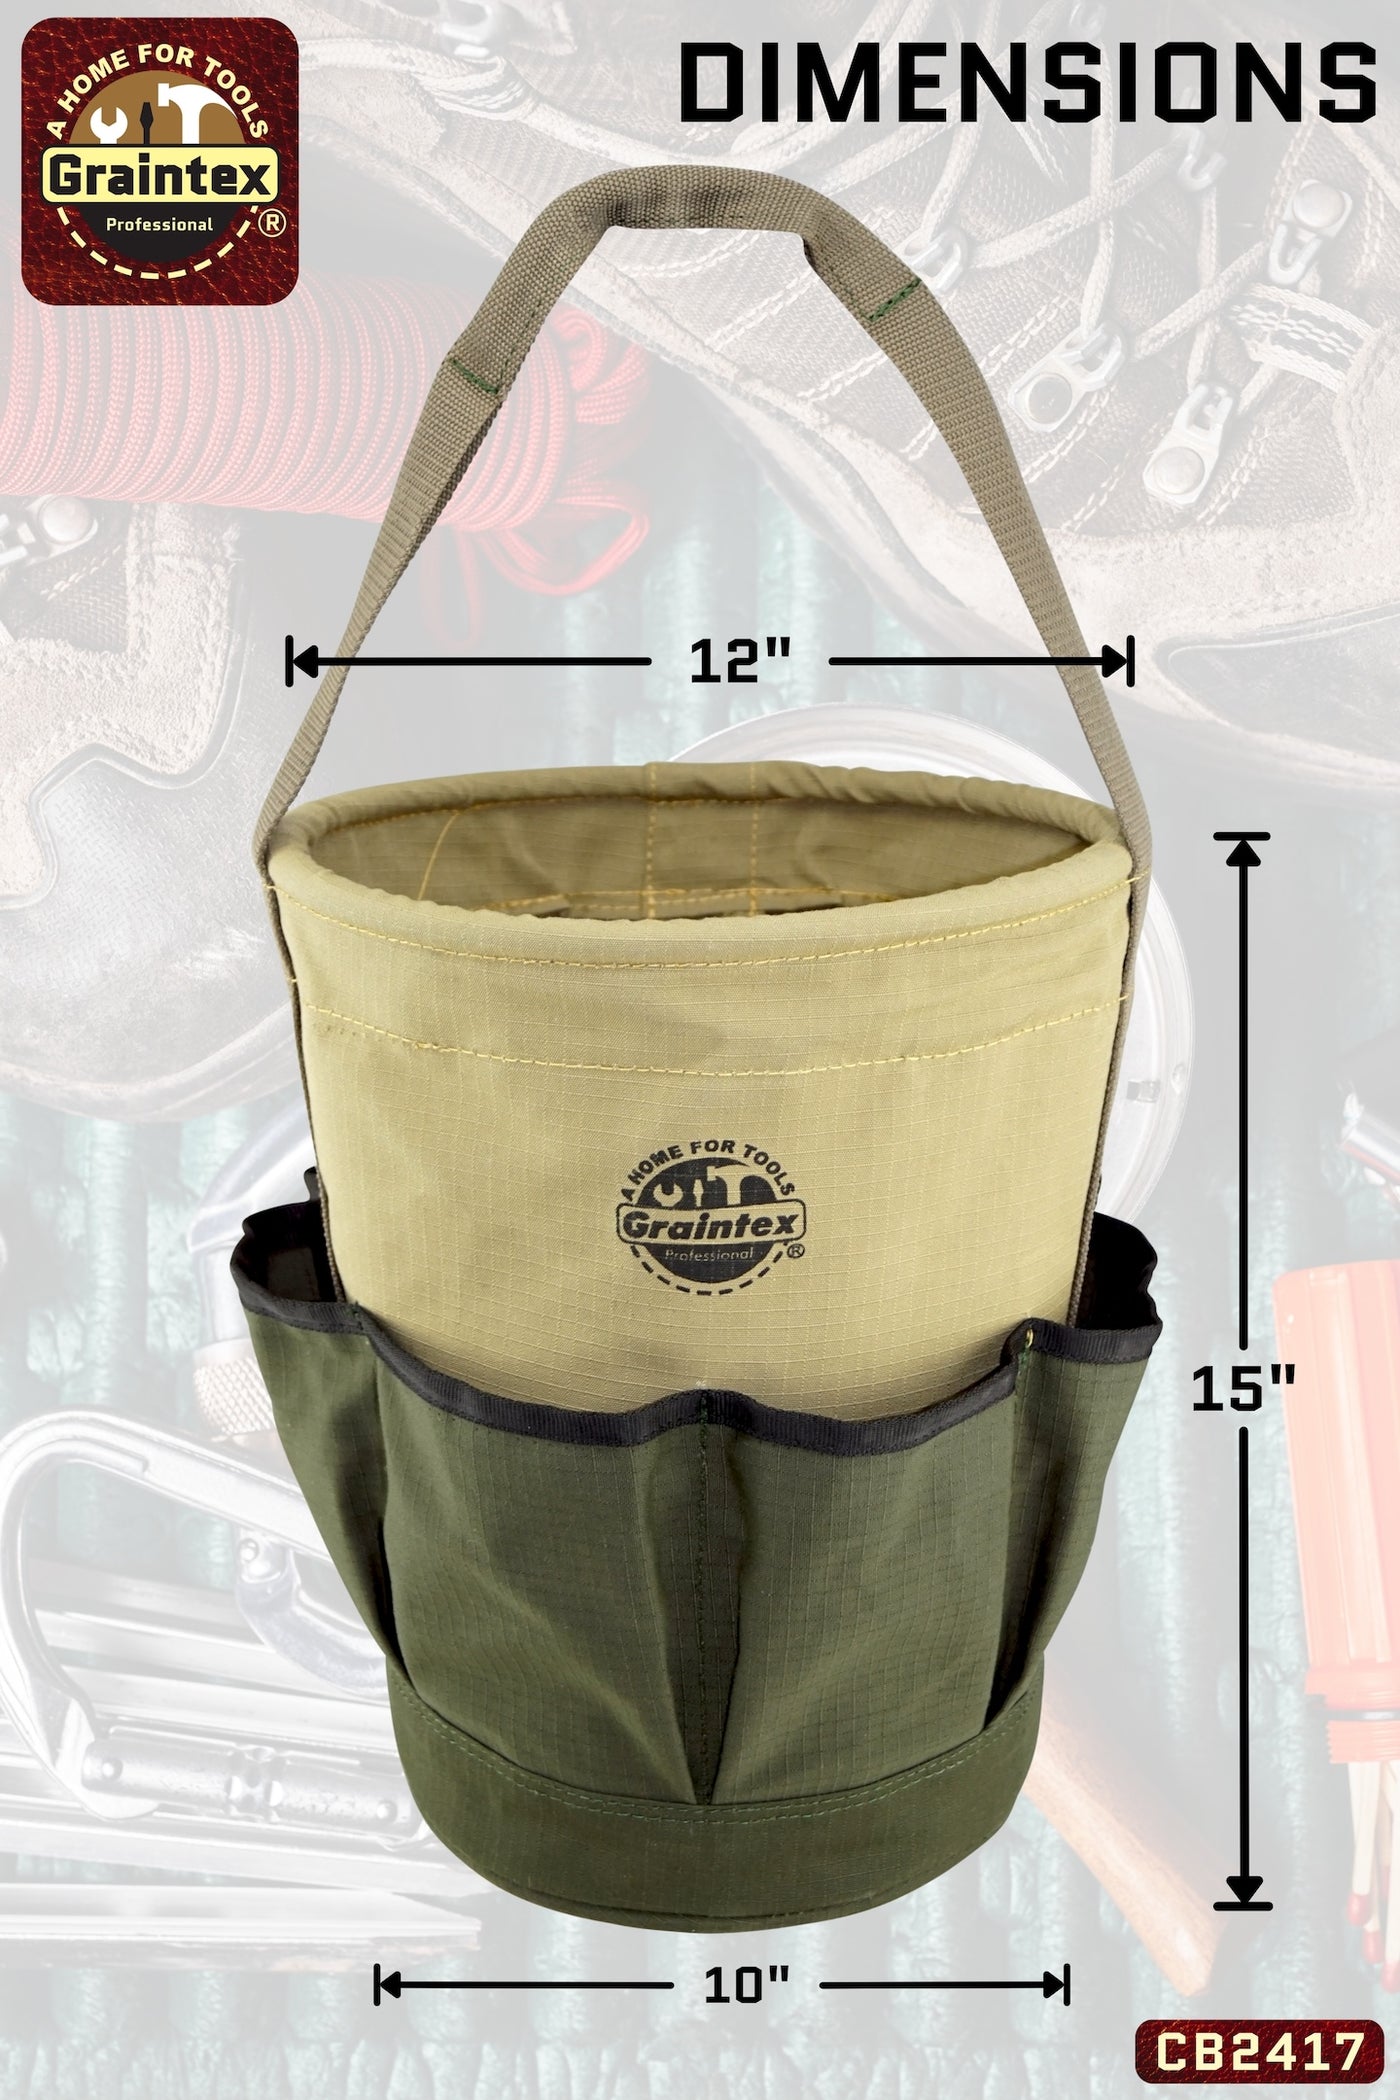 CB2417 :: MULTIPURPOSE TAPERED CANVAS BUCKET 6 OUTER POCKETS 12”X10”X15” WEBBING HANDLE